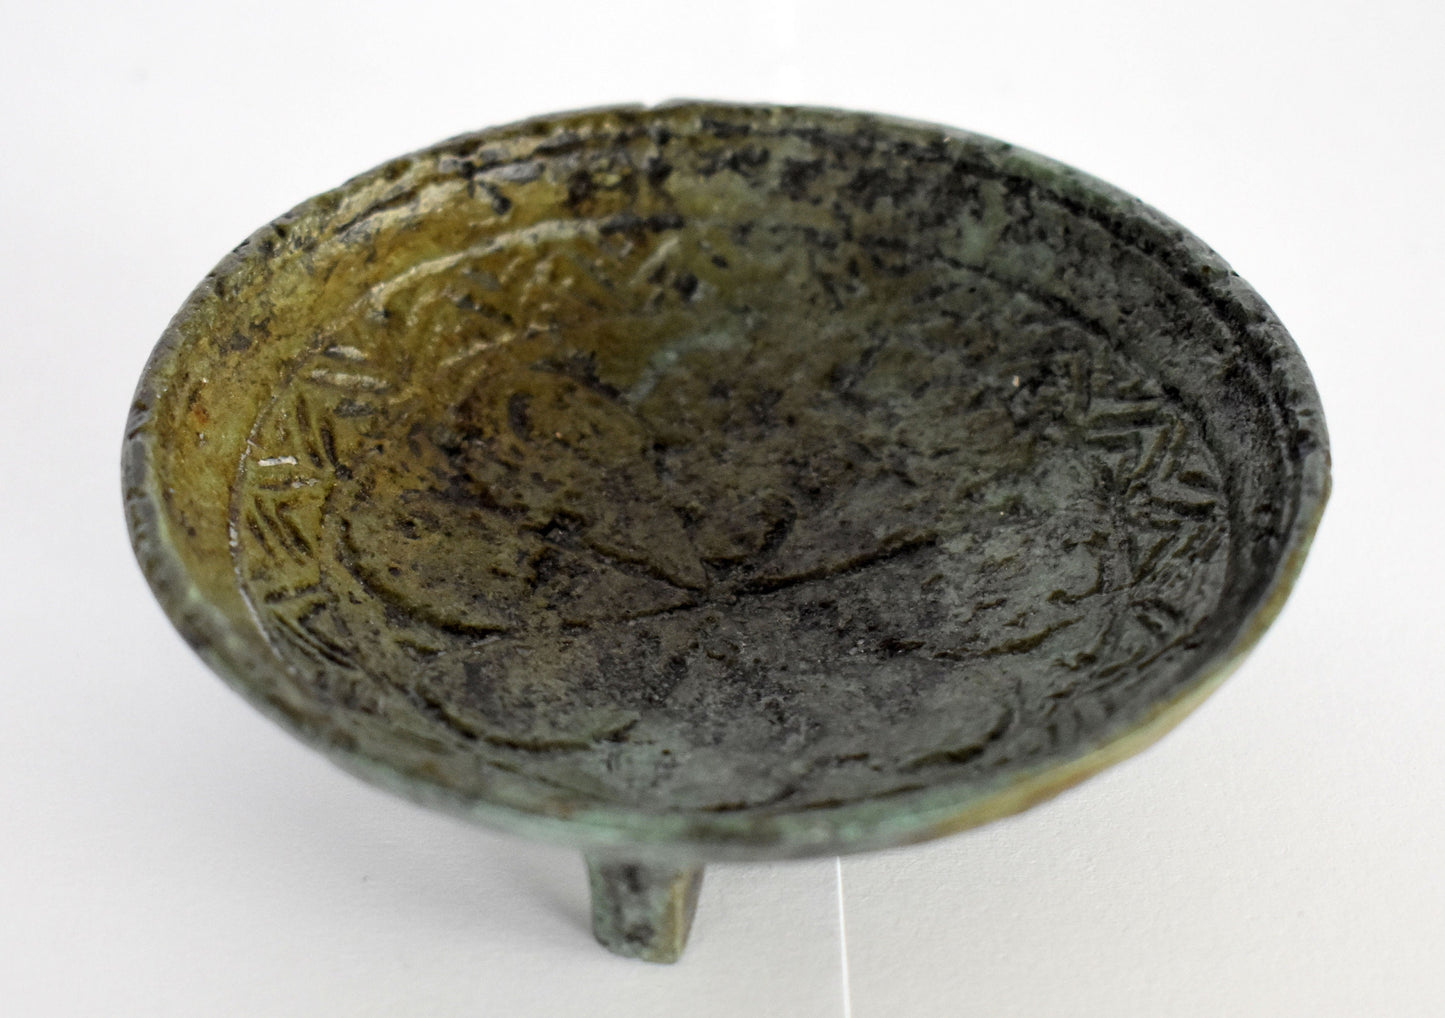 Ancient Greek Macedonian Plate with Floral Design - Small Size - Museum Reproduction - Pure Bronze Item